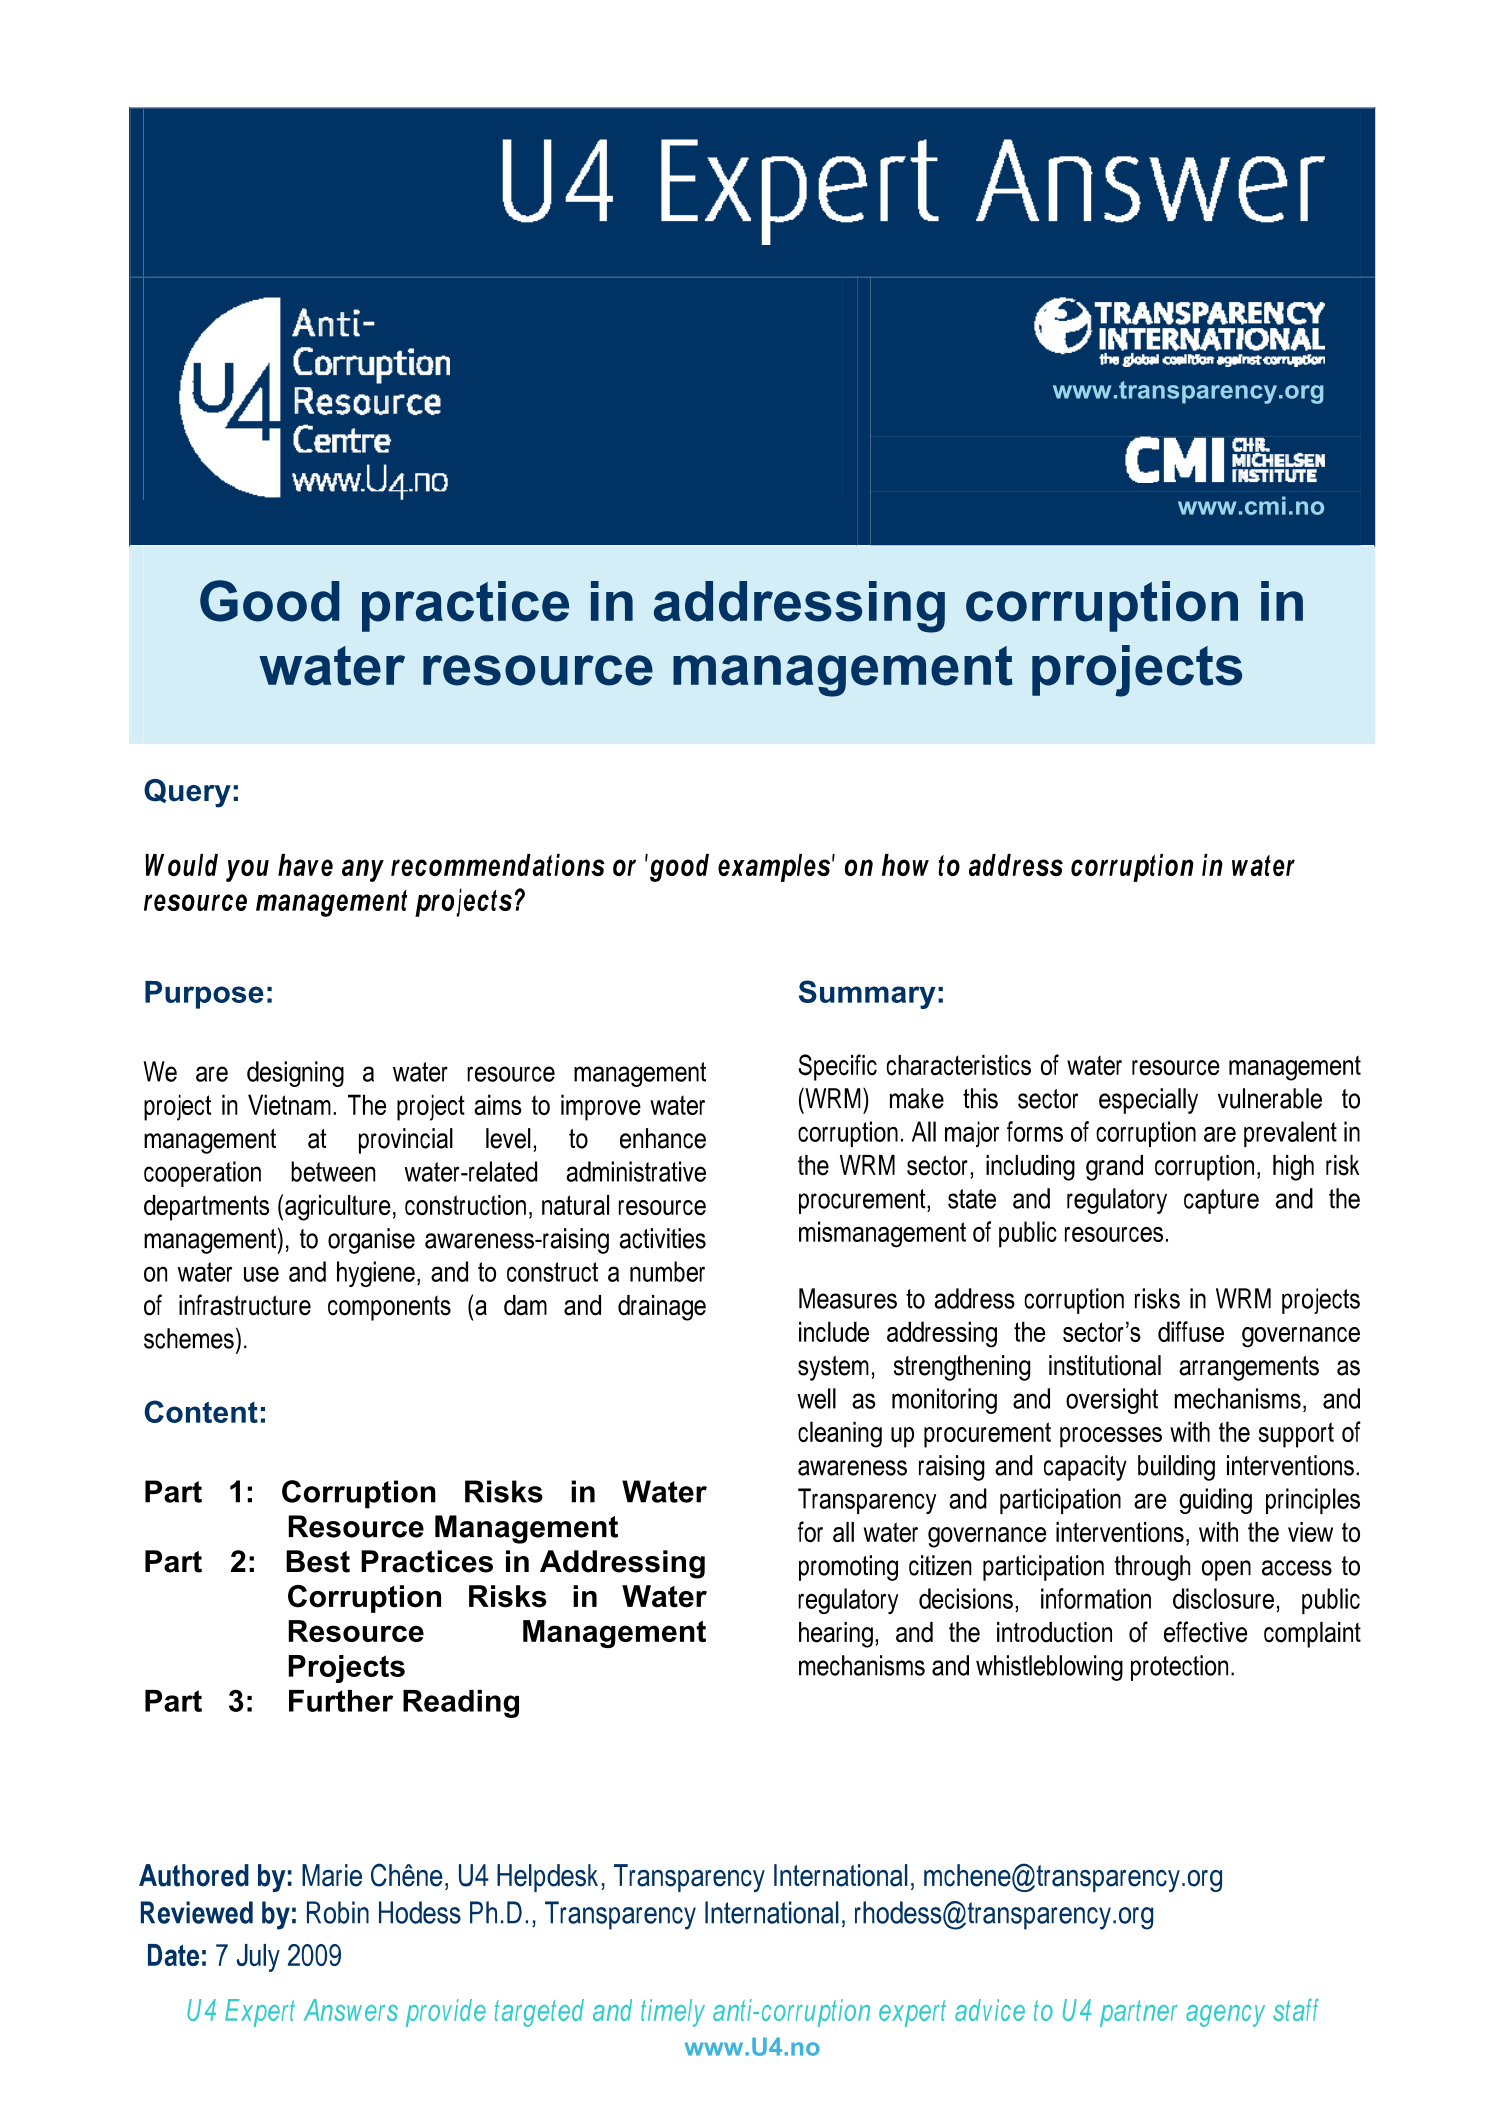 Good practice in addressing corruption in water resource management projects